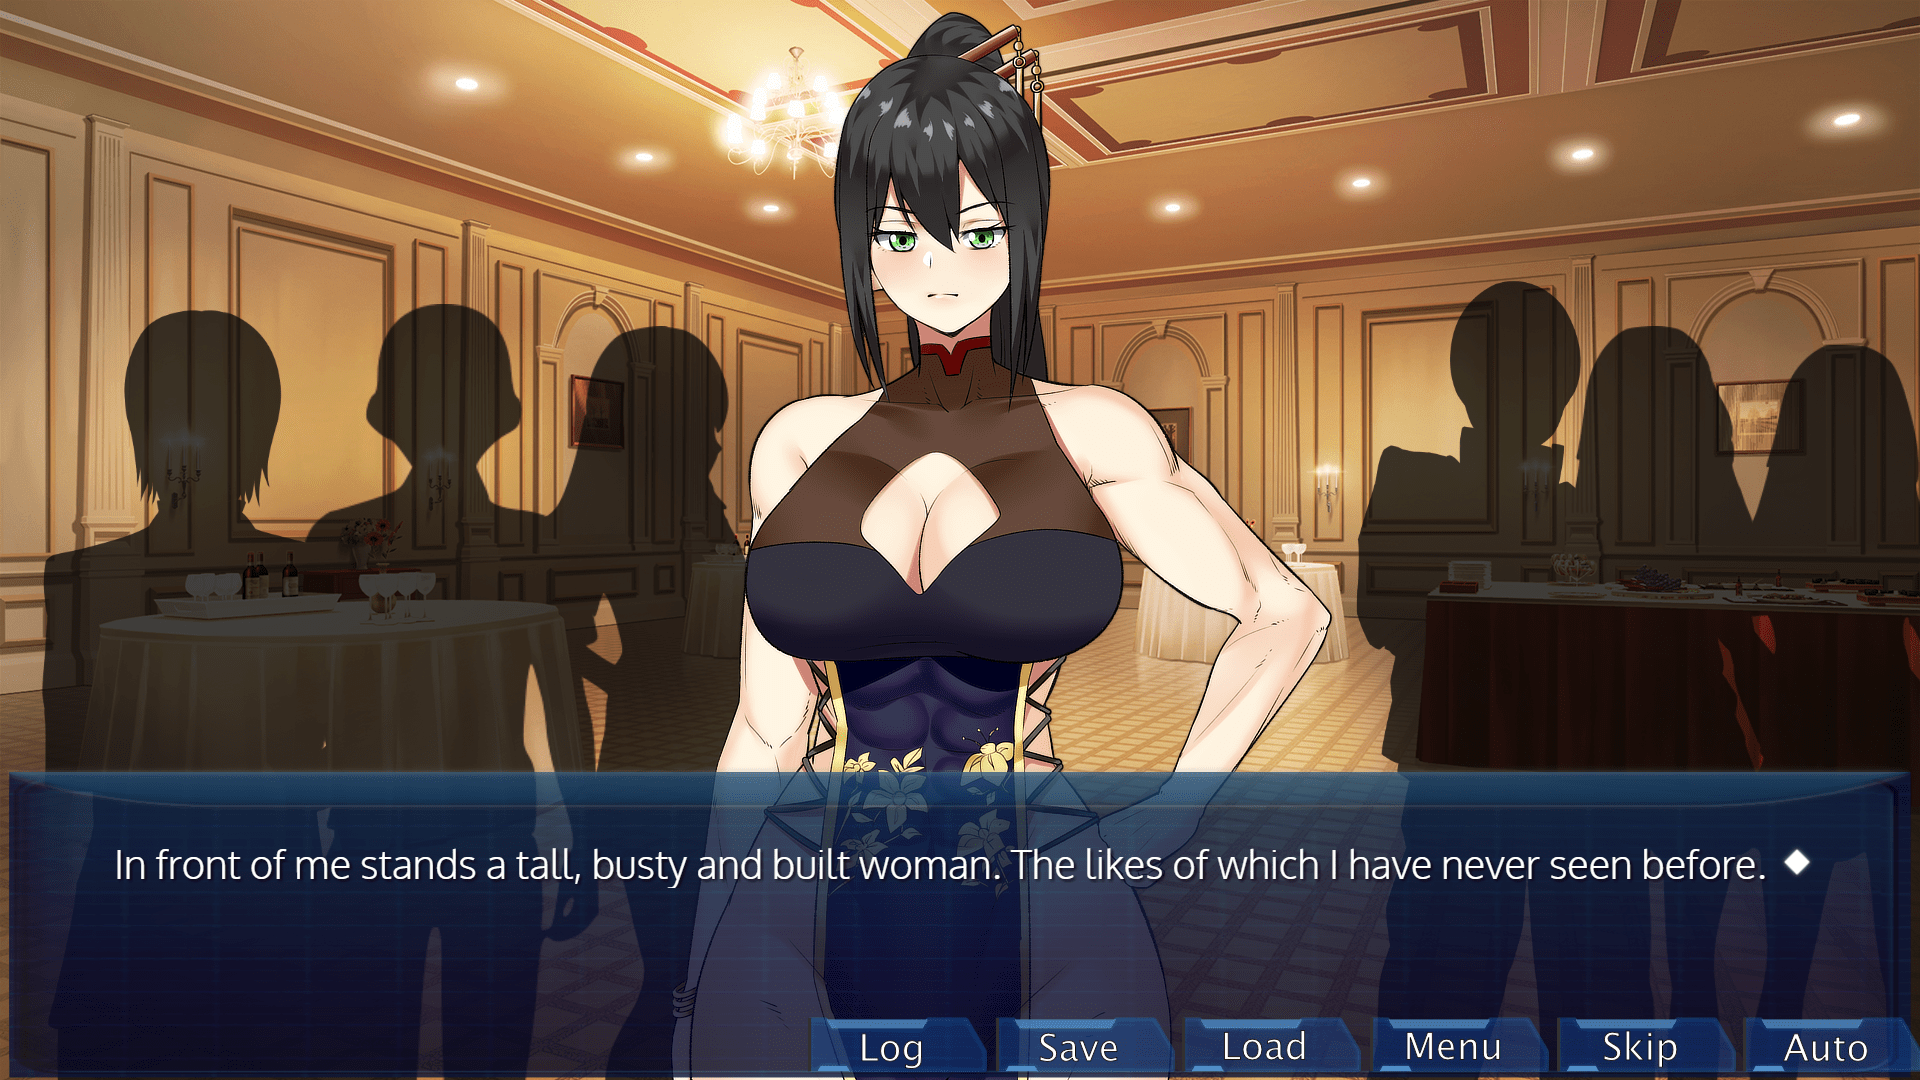 new-femdom-centric-visual-novel-eroge-starring-a-muscle-girl-available-now-release-announcements-itch-io